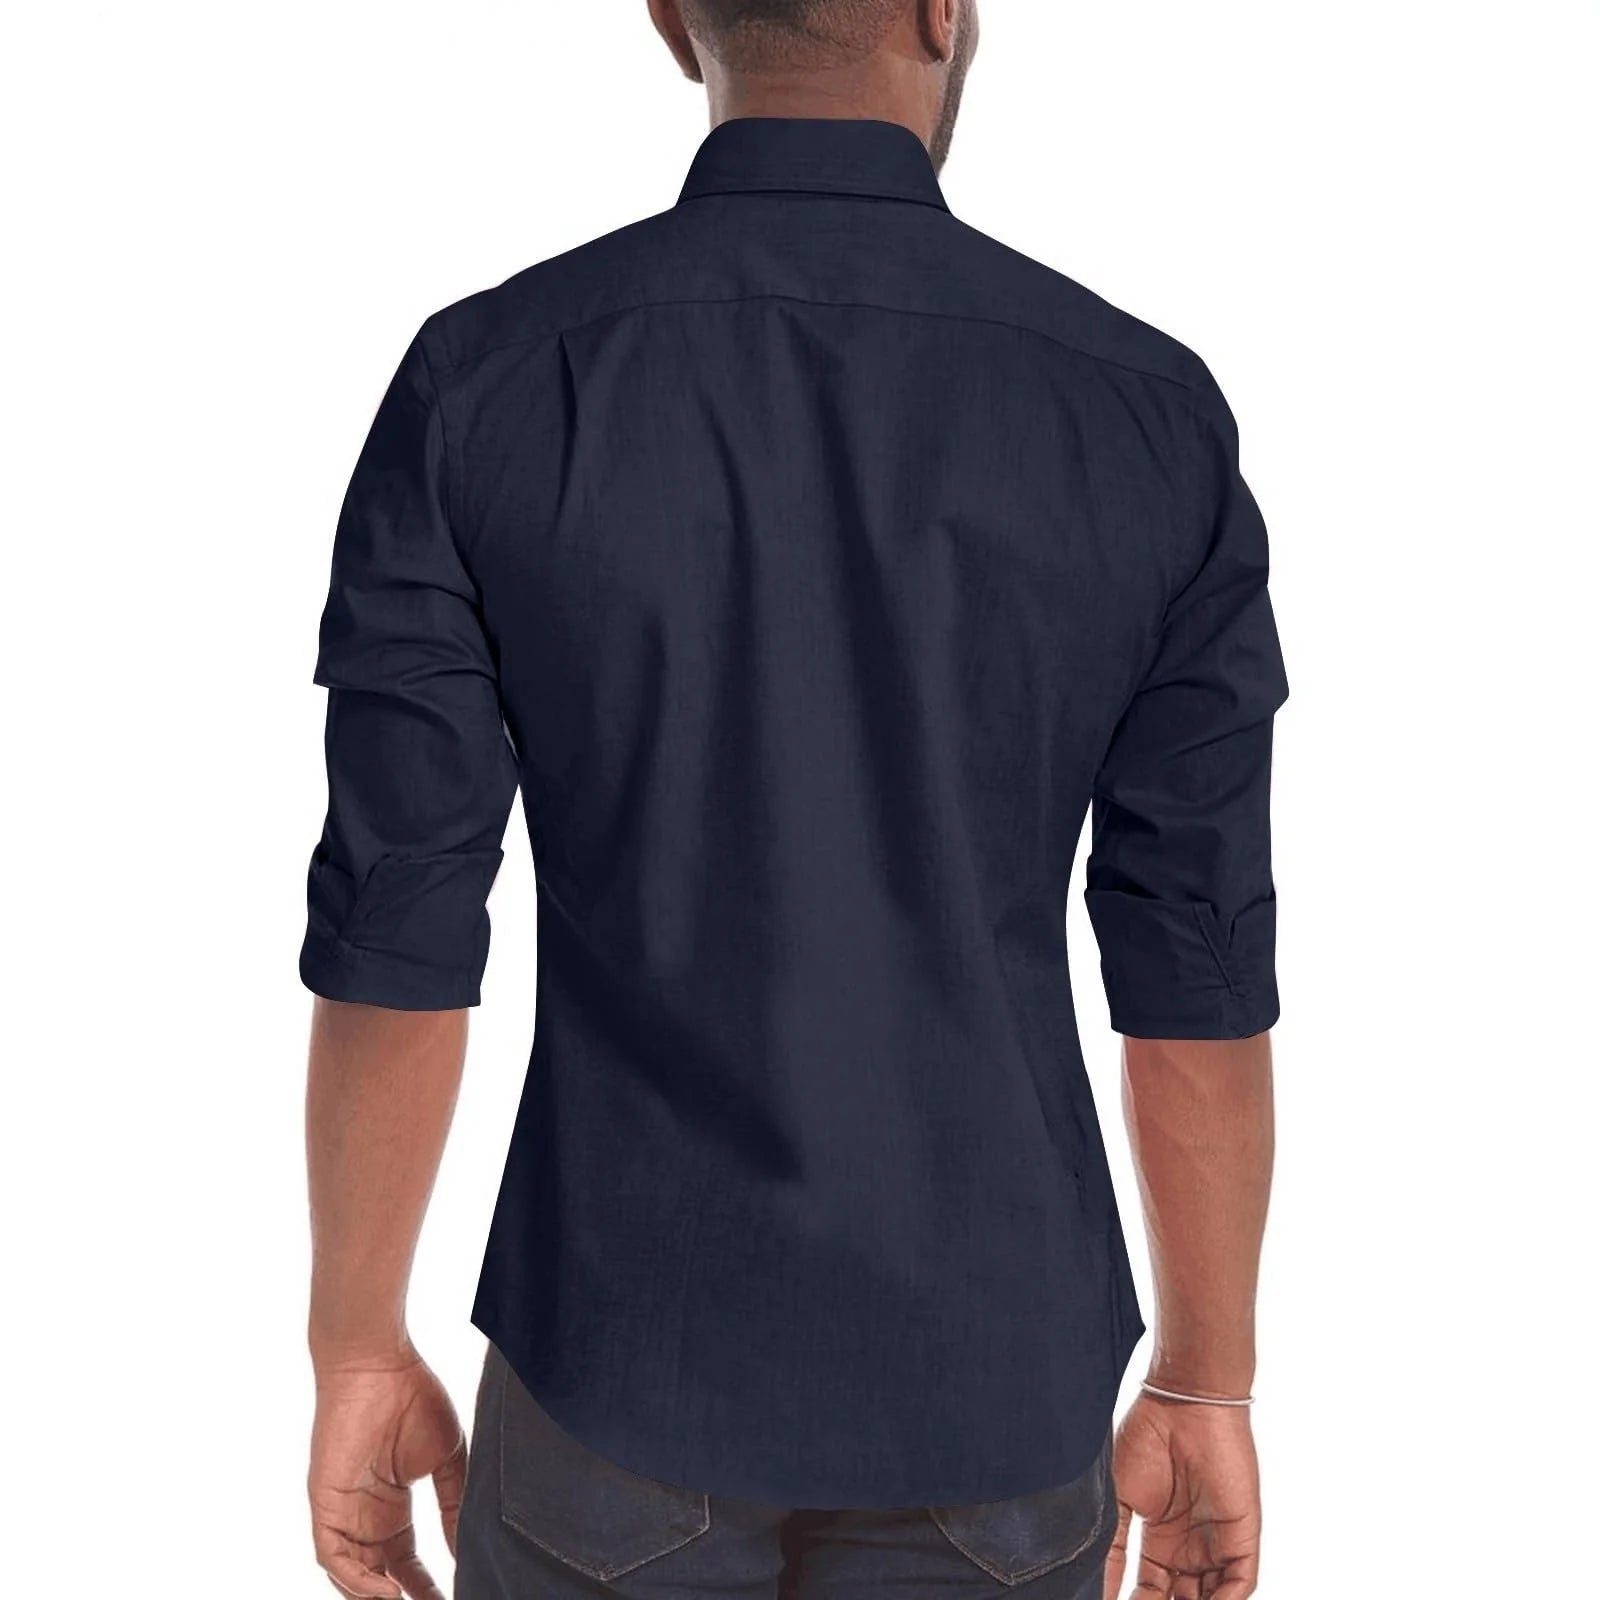 ONLY™ - Shirt with Zipper (70% DISCOUNT TODAY)